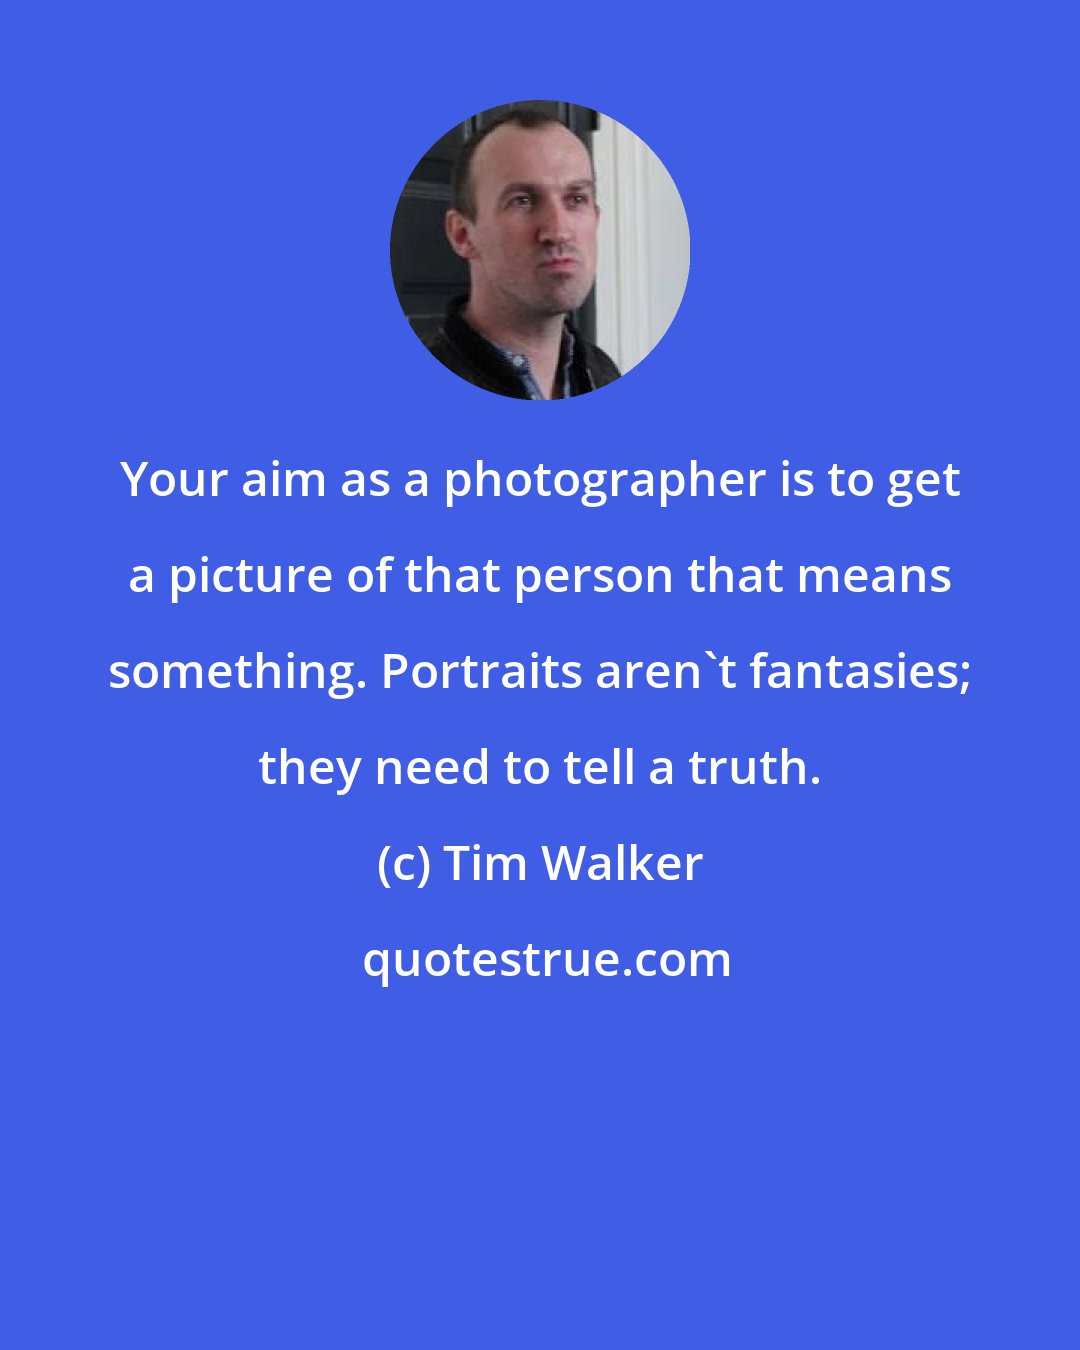 Tim Walker: Your aim as a photographer is to get a picture of that person that means something. Portraits aren't fantasies; they need to tell a truth.